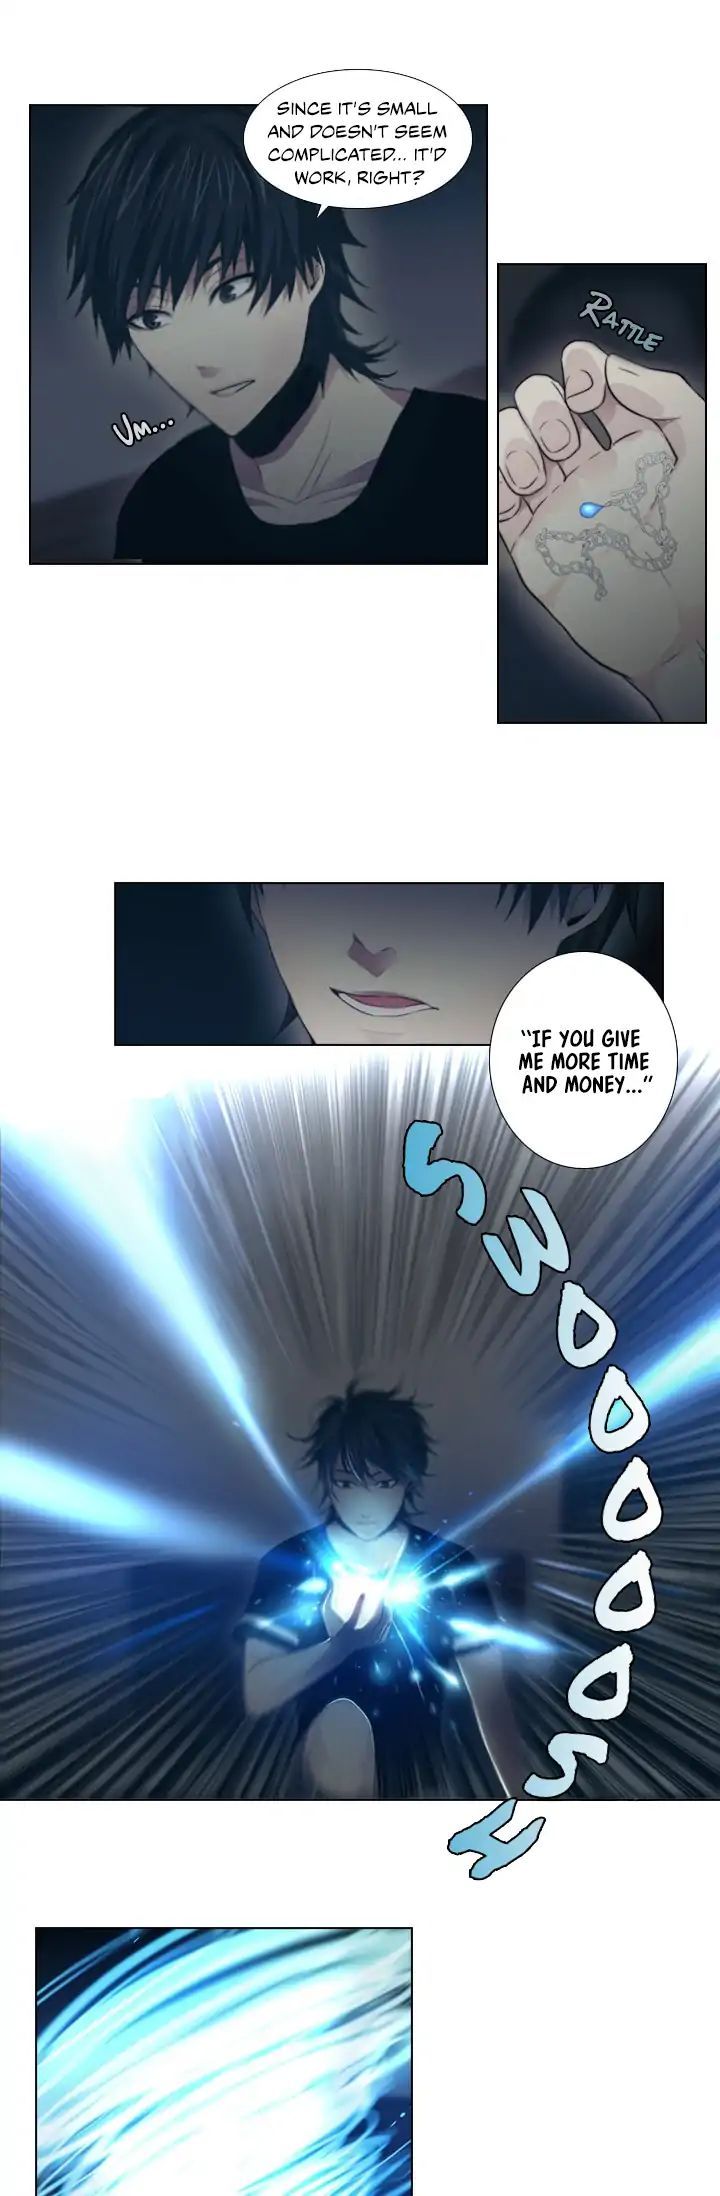 Gong Heon Ja Chapter 2 page 20